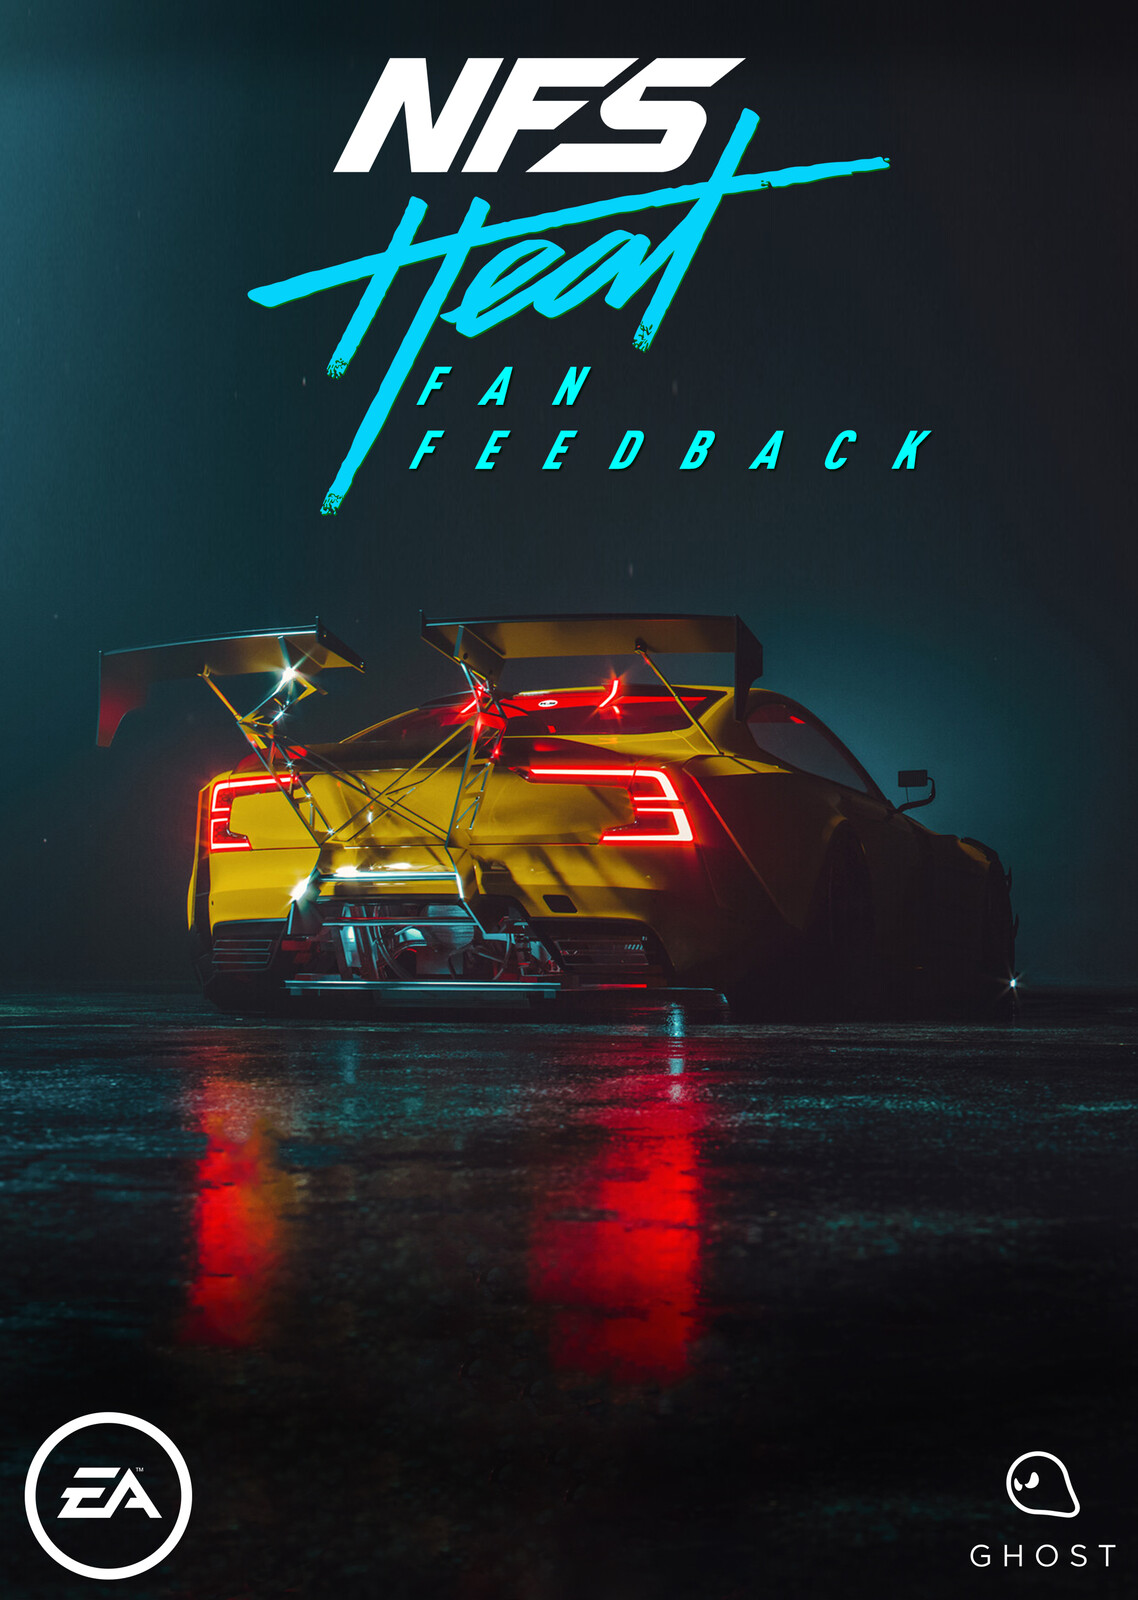 Mighoet Sündback - Need for Speed - Fast Covers